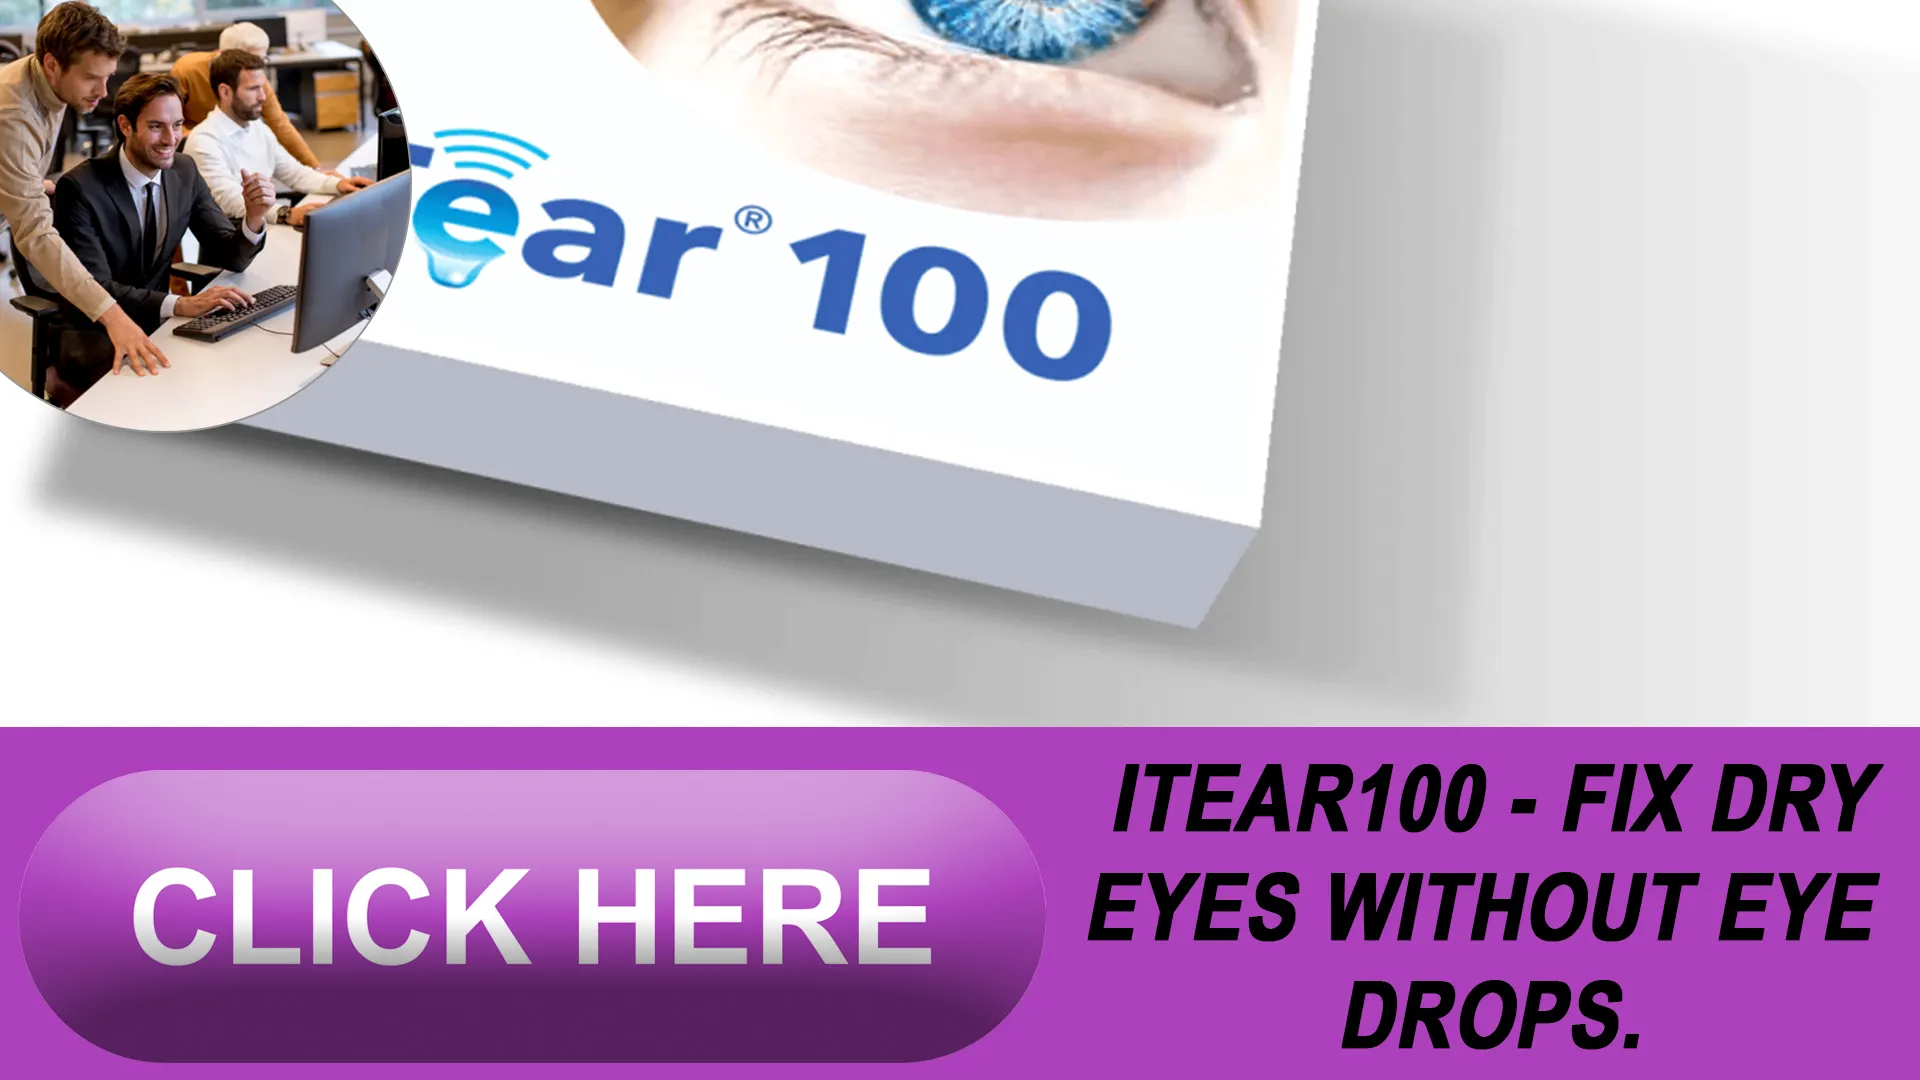 The iTear100 Experience: Seeing is Believing